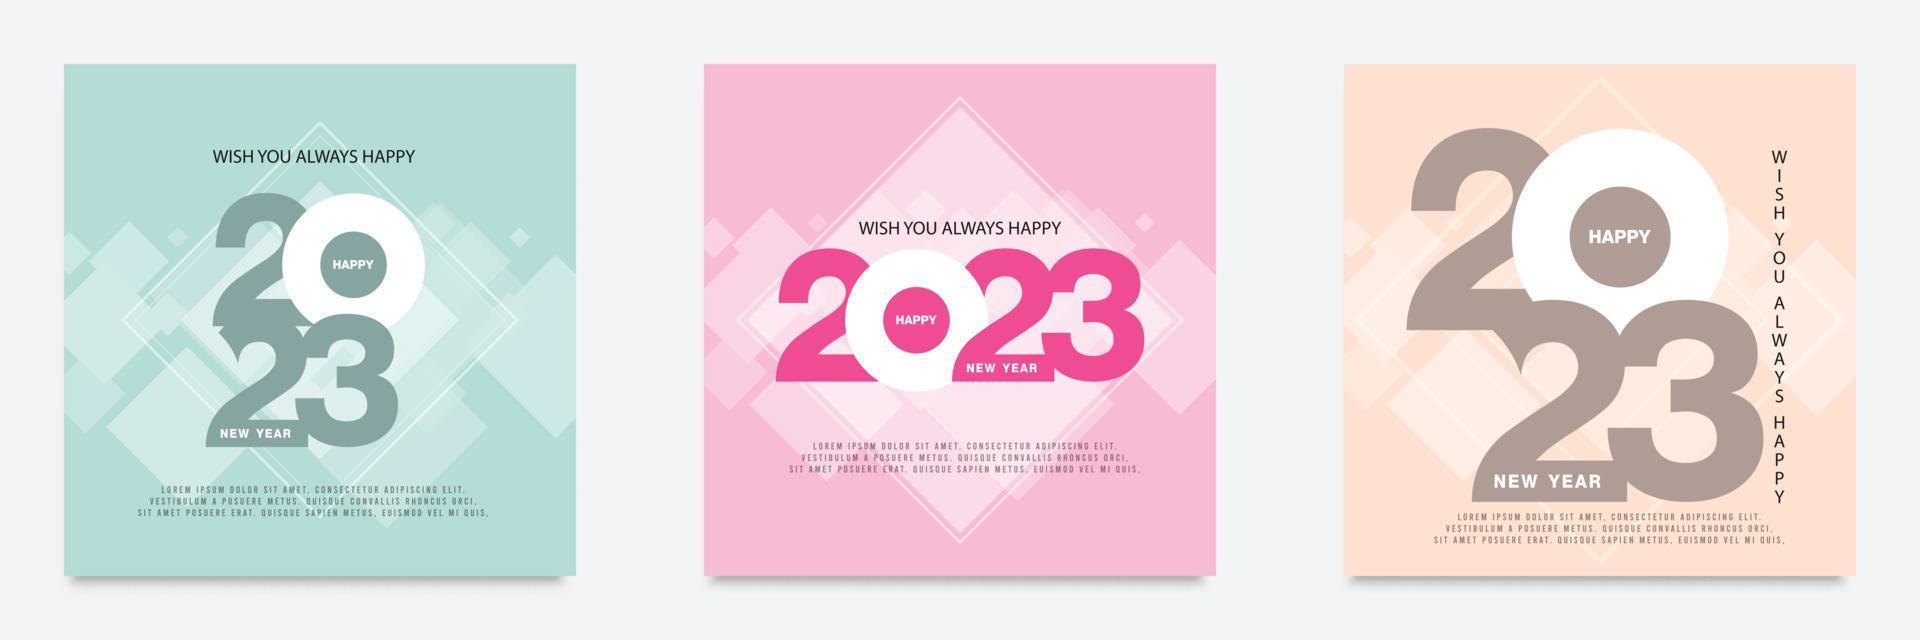 Happy new year 2023 on a square grid background. Set of 2023 new year square template for calendar, cover, card and media post. 2023 typography logo vector